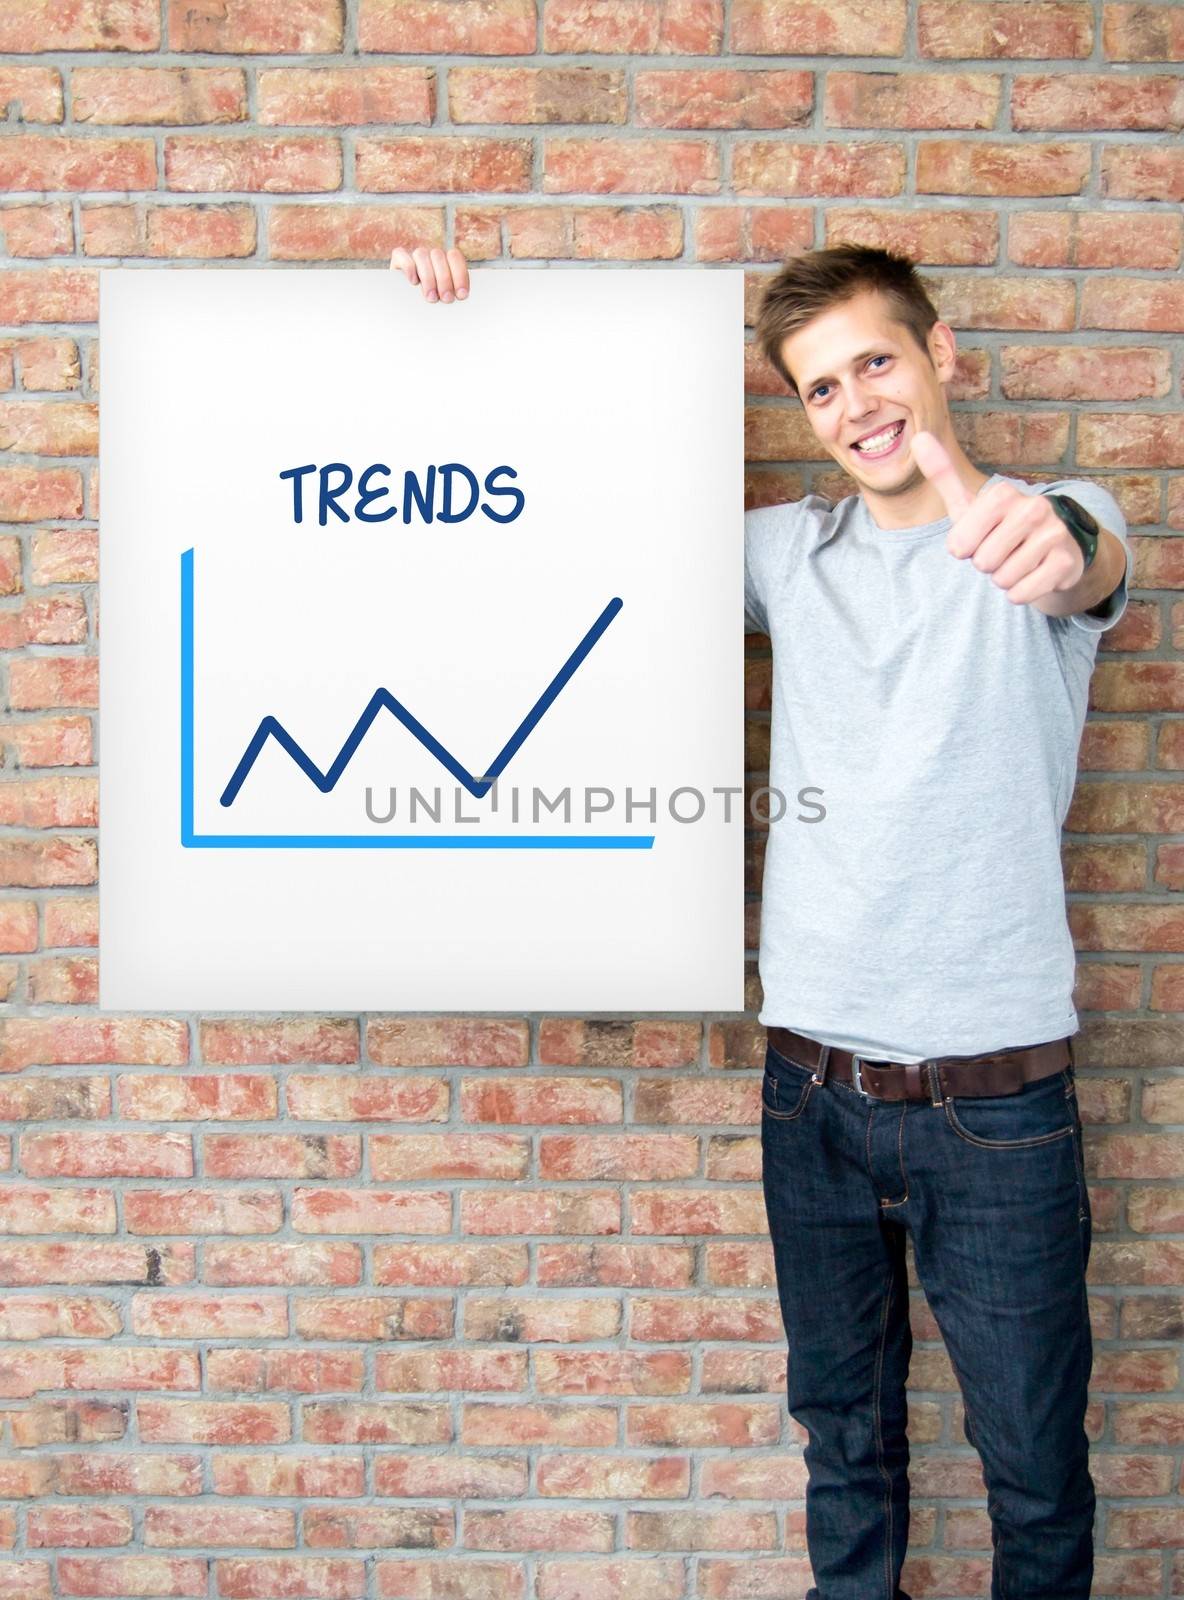 Young man holding whiteboard with trends chart